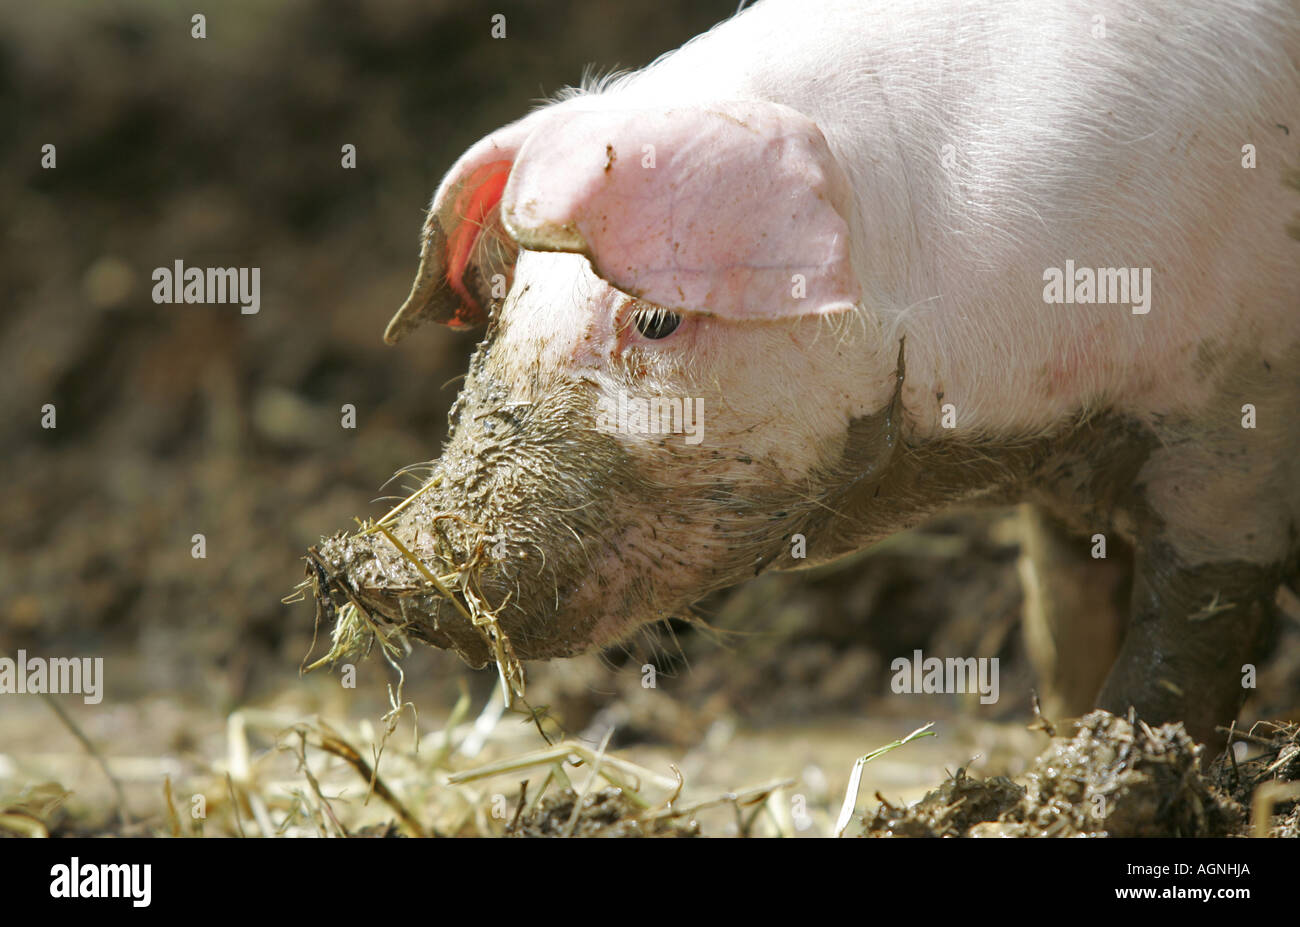 Ismaning, GER, 10. Aug. 2004 - Little pig Stock Photo